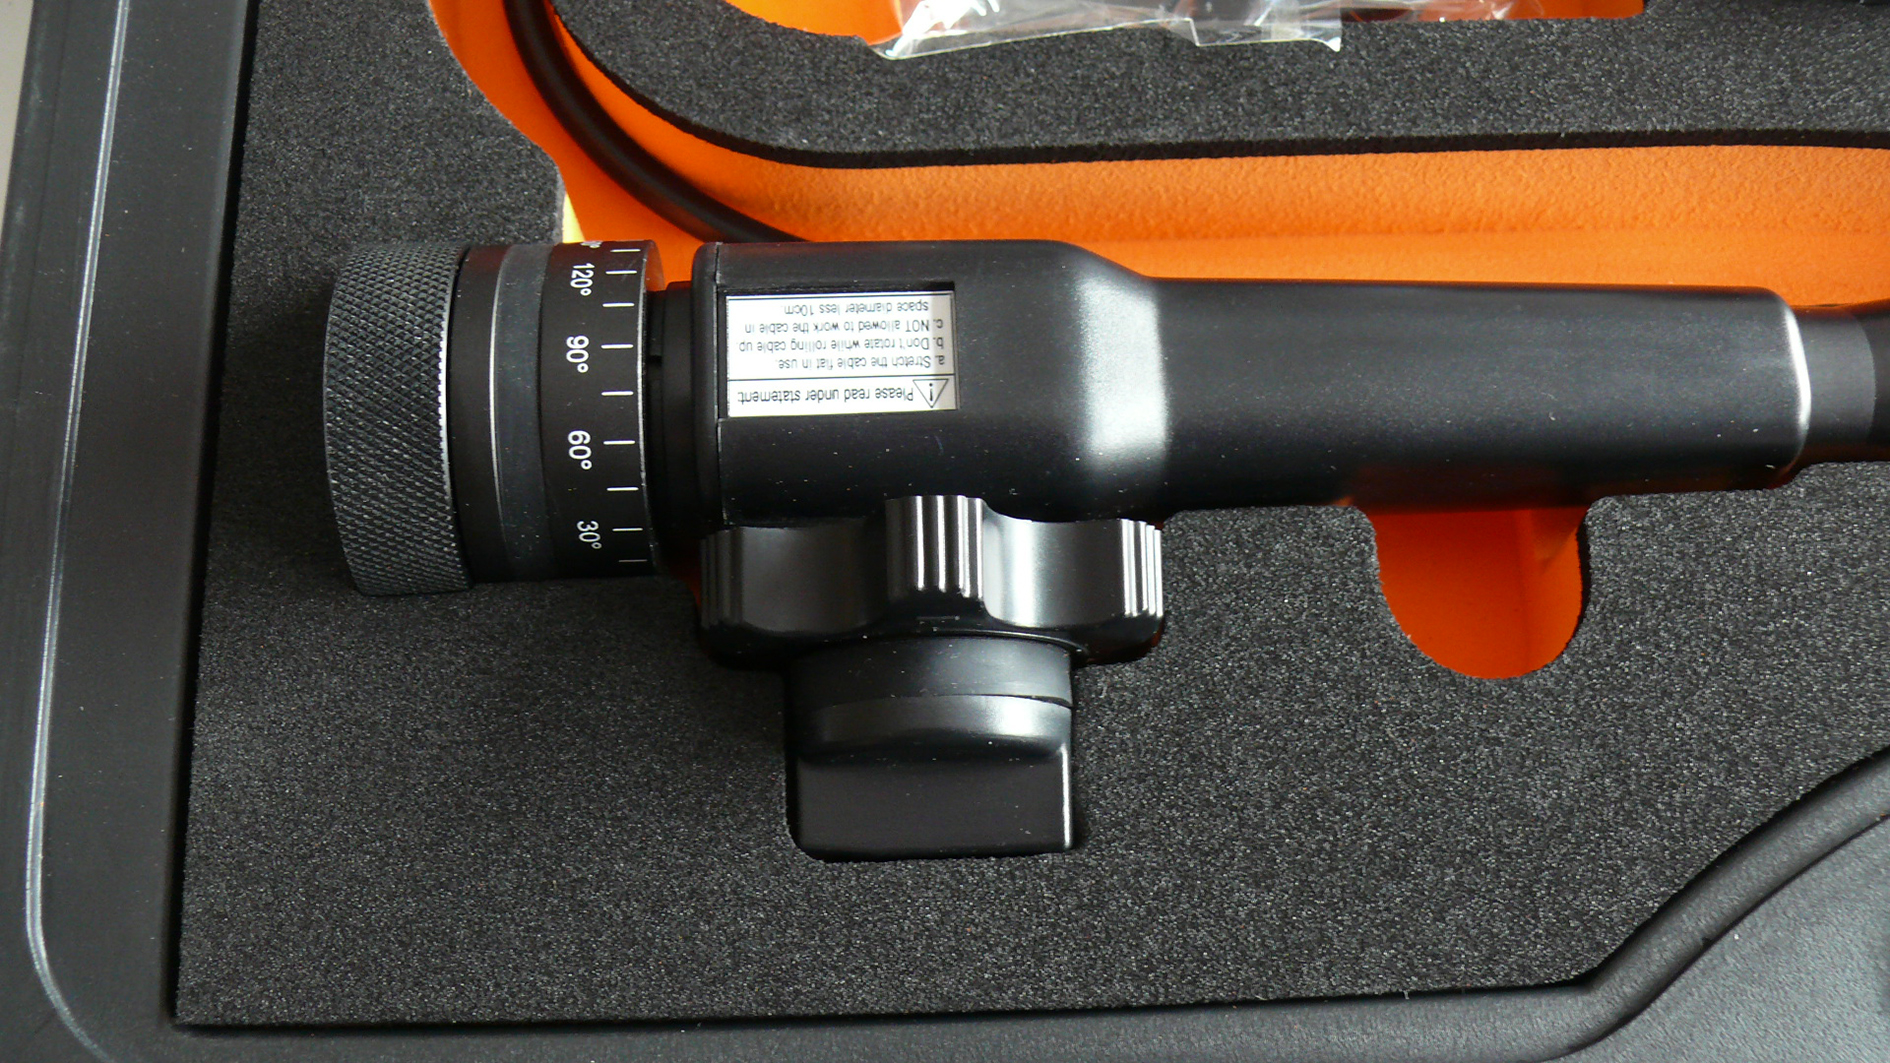 3.5" Video endoscope TTS-S06, with flexible 5.8 mm ∅ camera probe